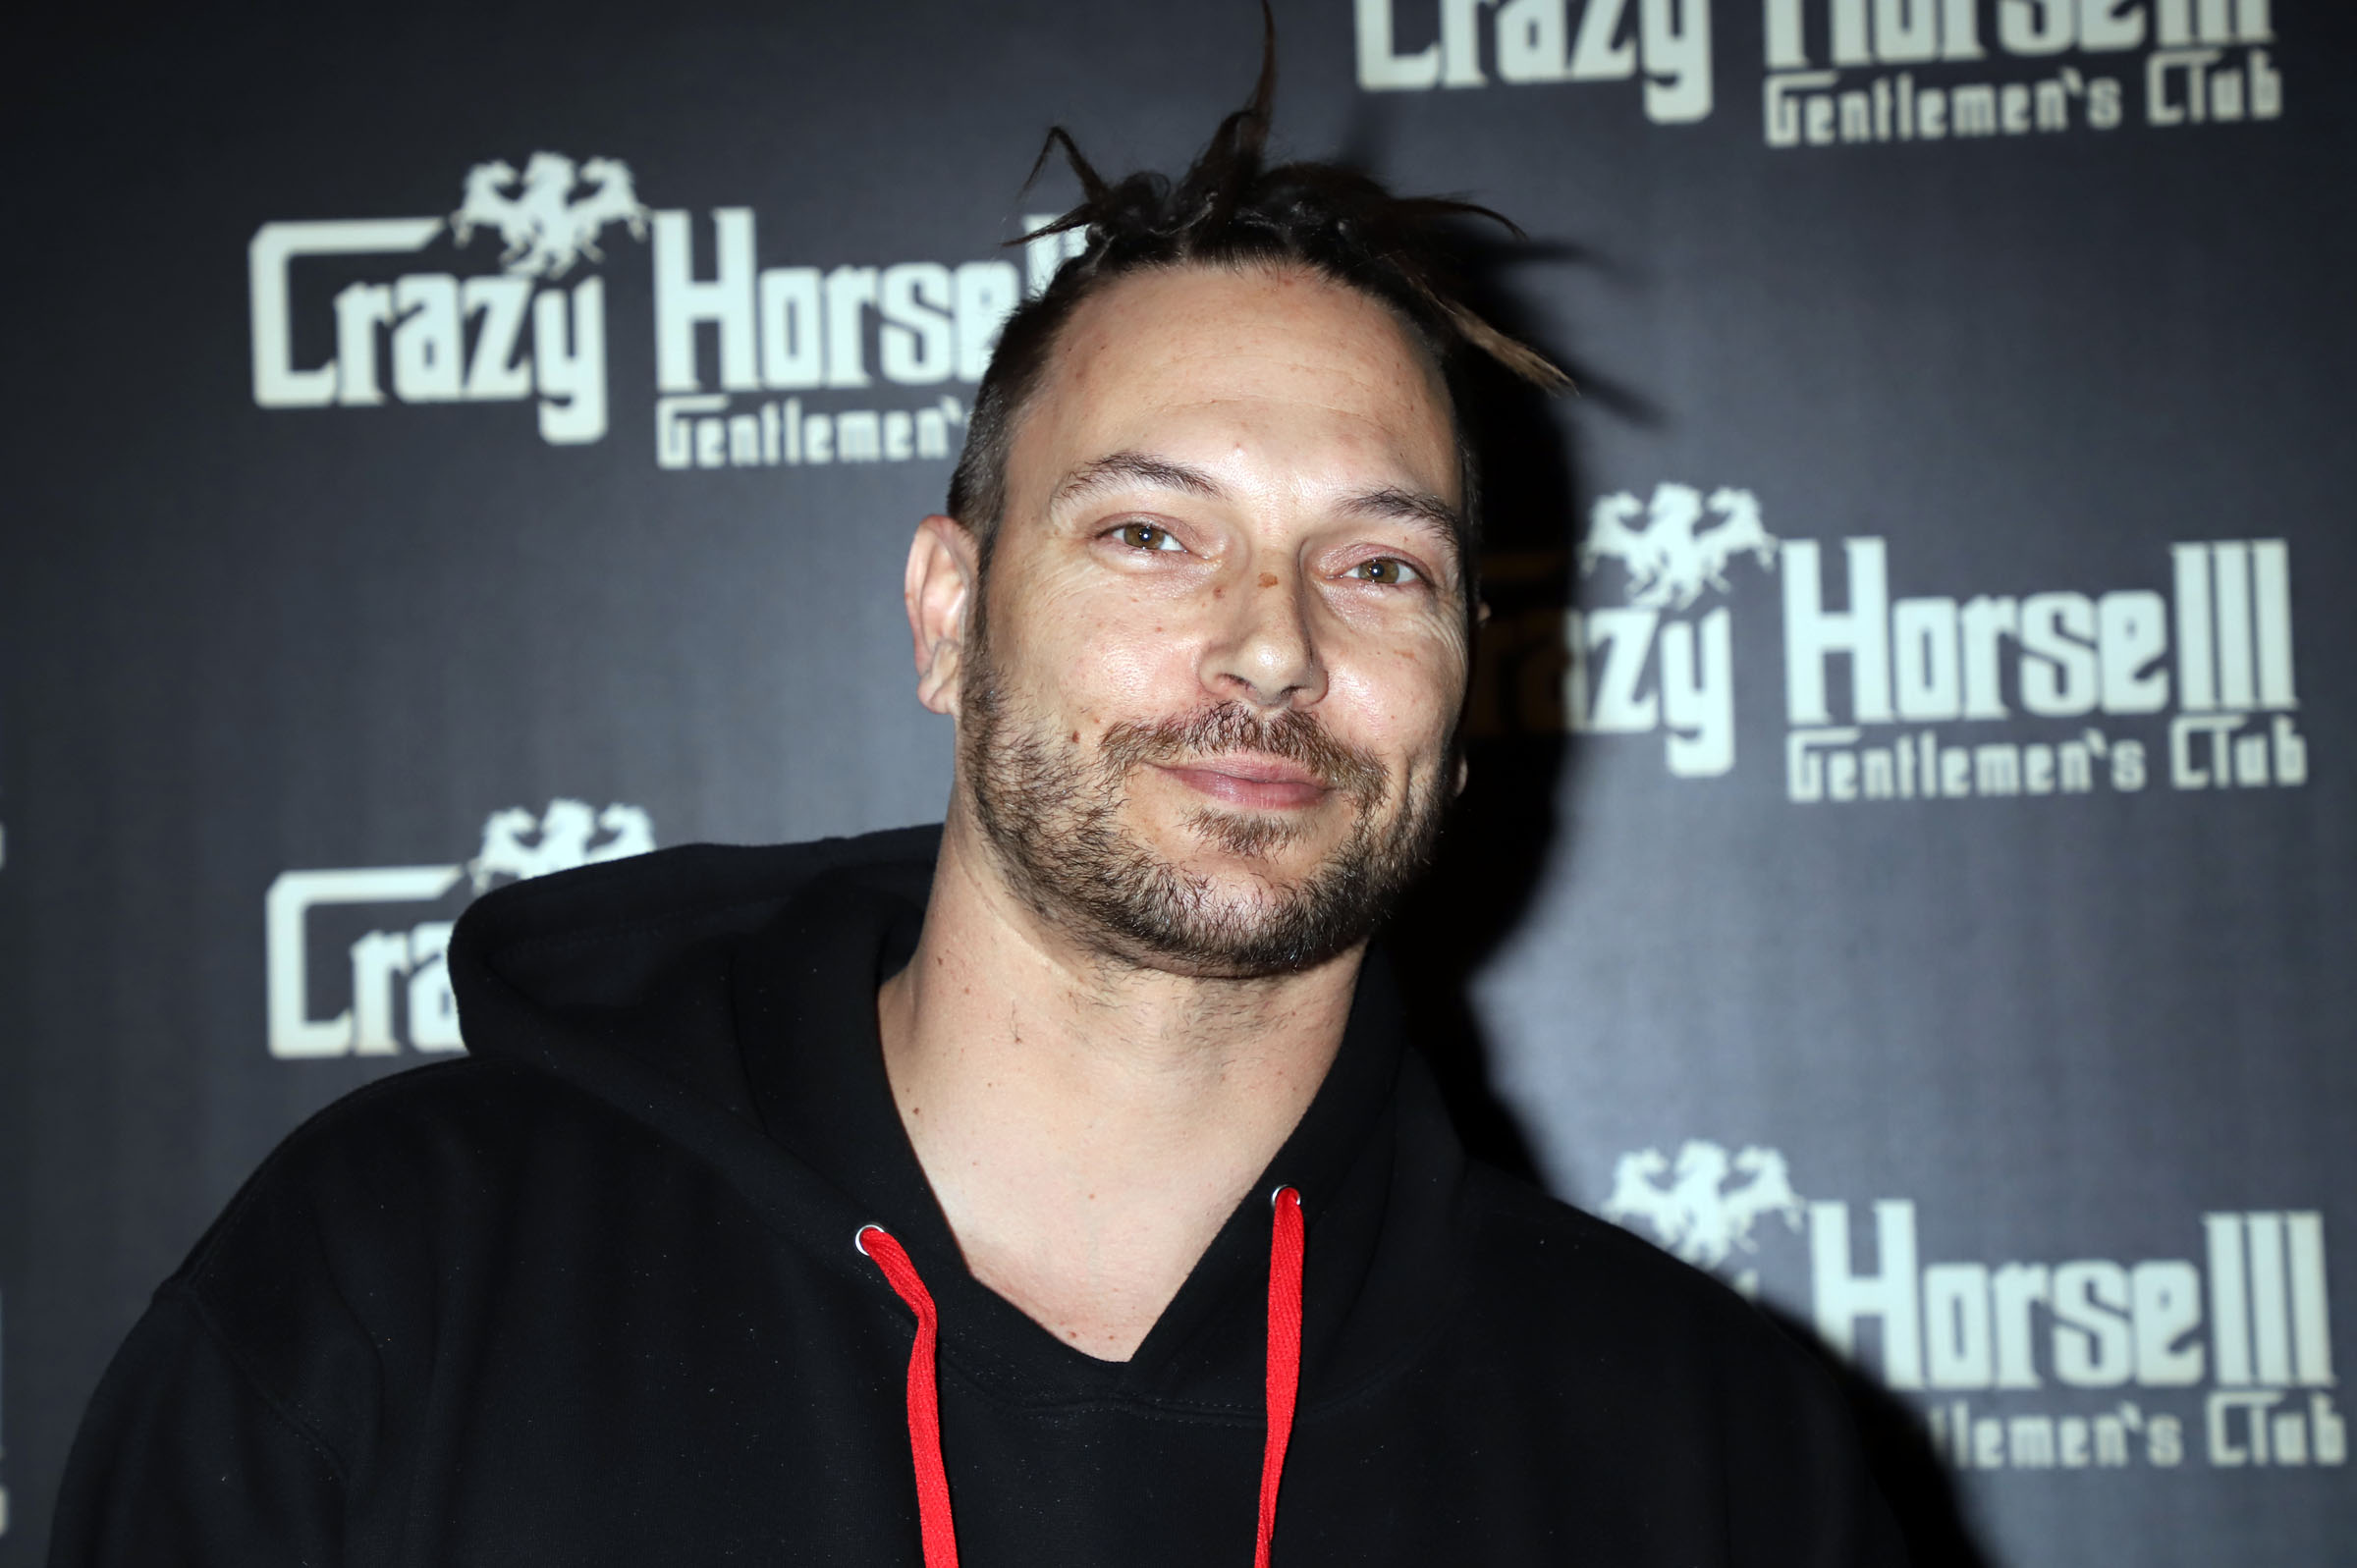 Kevin Federline celebrates his 40th Birthday and performs a DJ set in Las Vegas